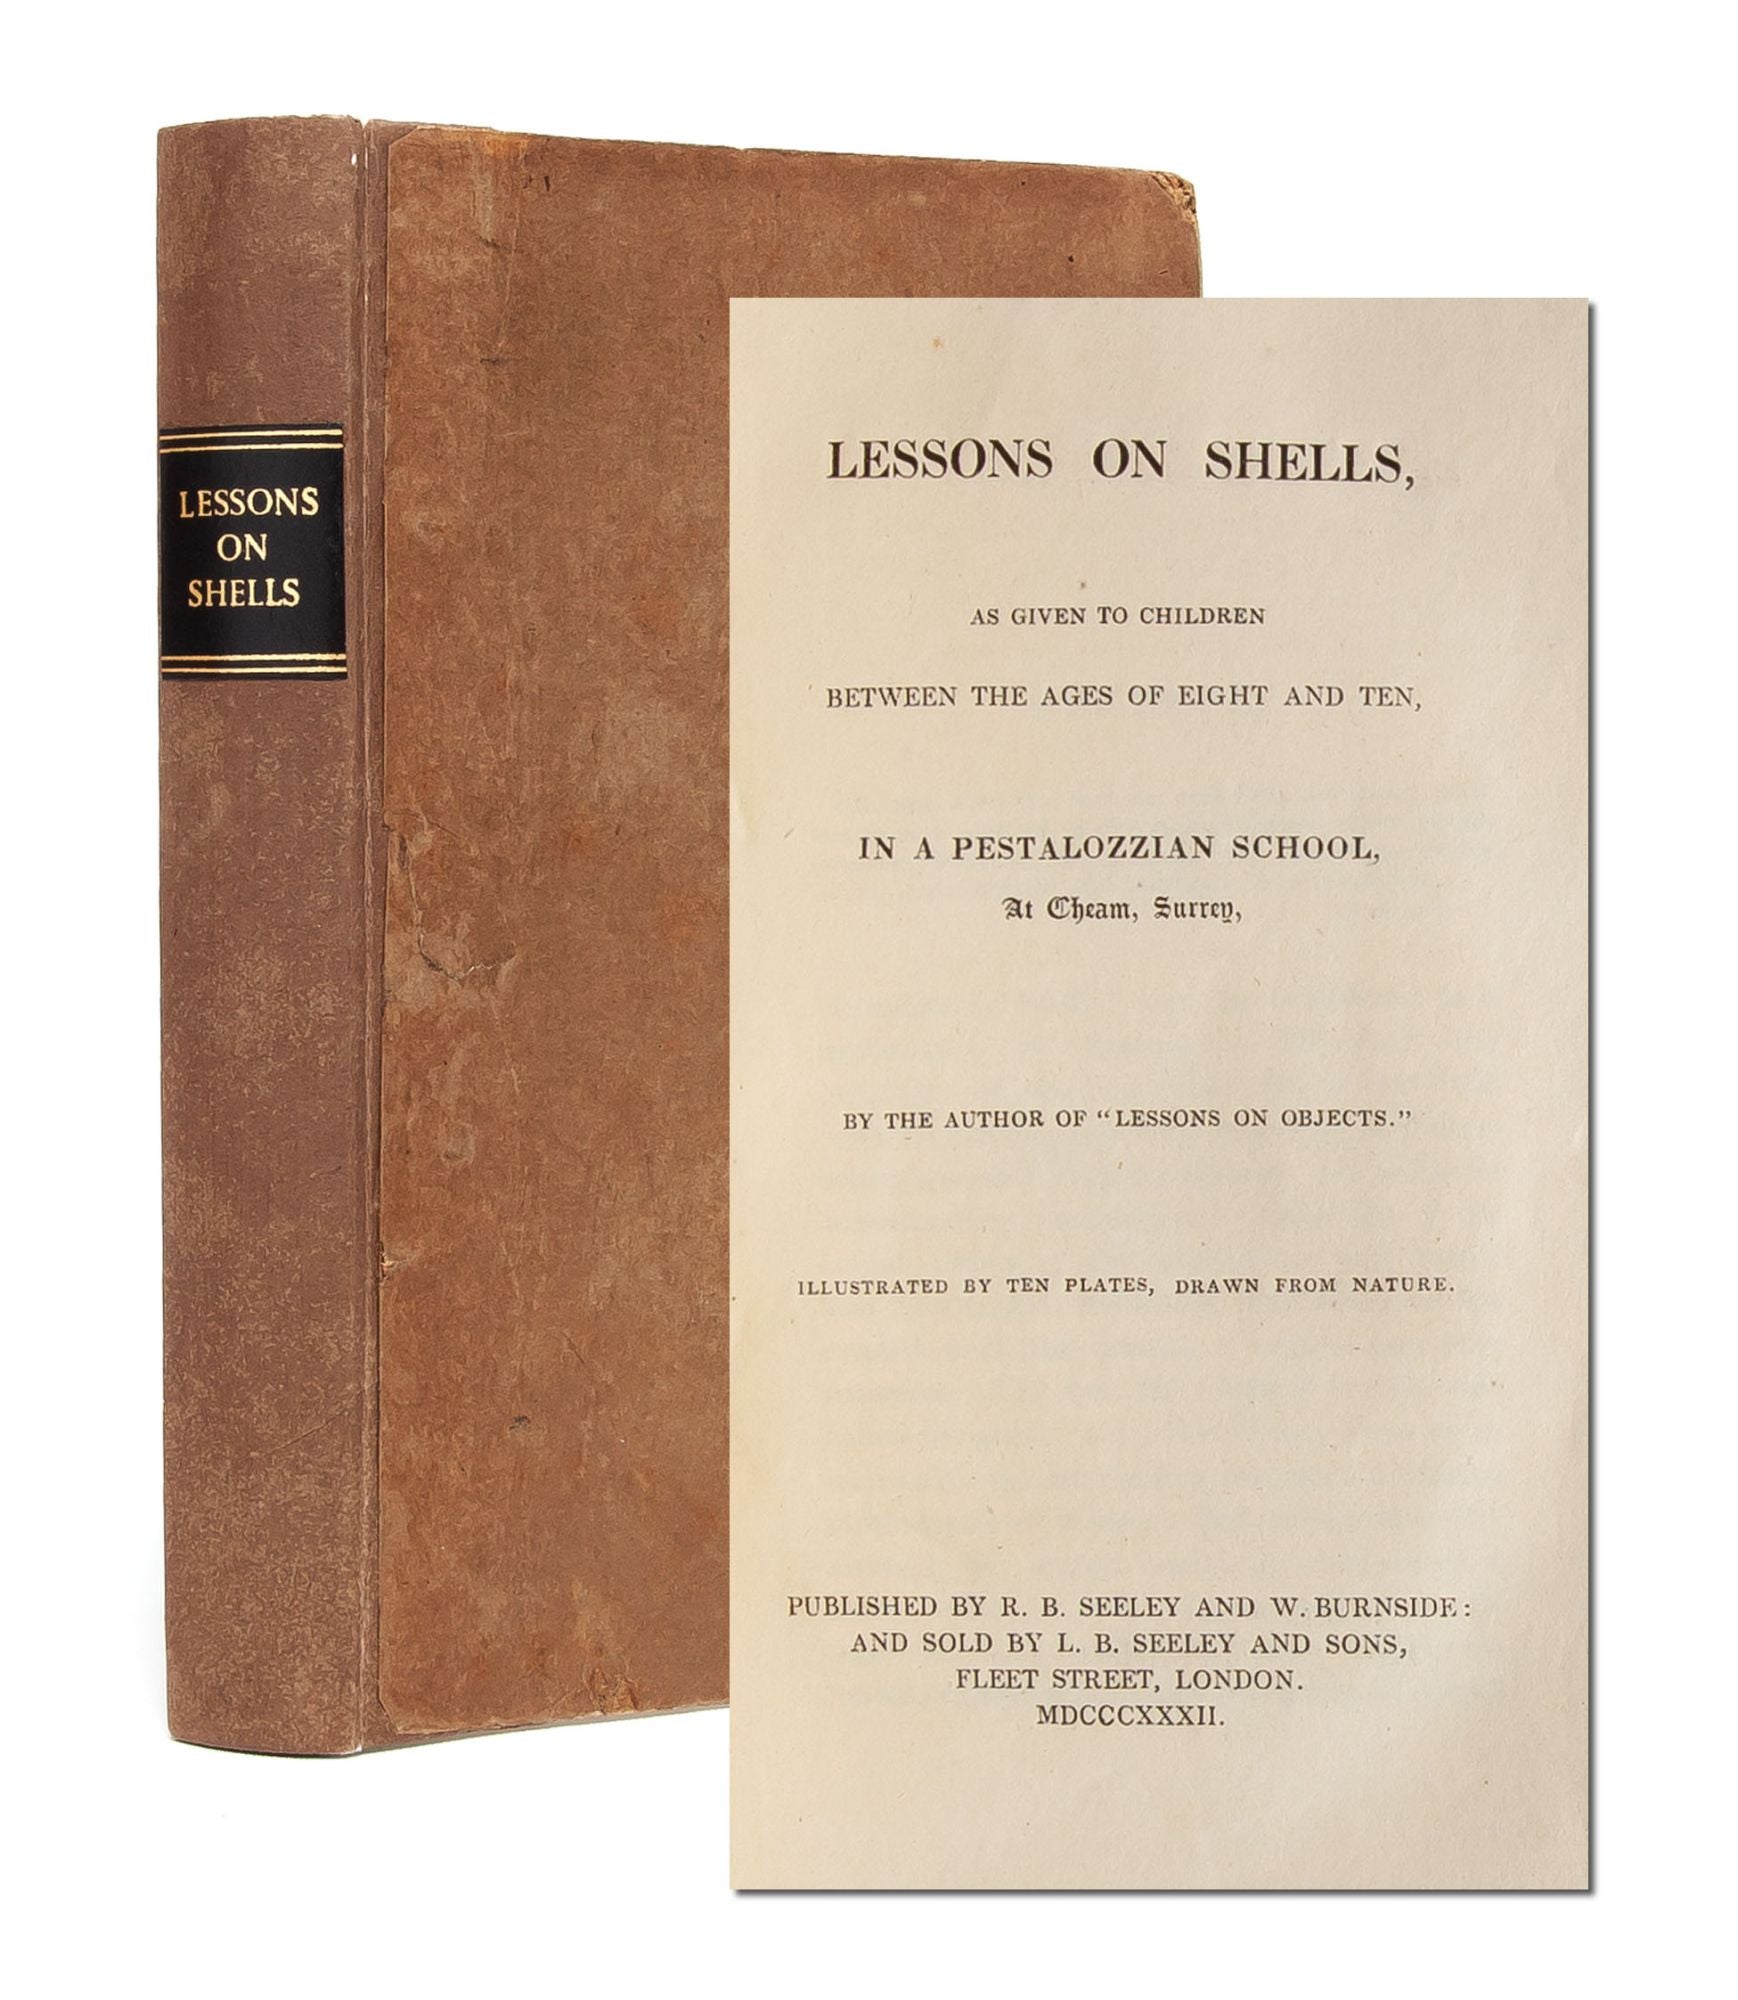 (Item #5503) Lessons on Shells, as Given to Children Between the Ages of Eight and Ten, in a Pestalozzian School. Women Citizen Scientists, Elizabeth Mayo.